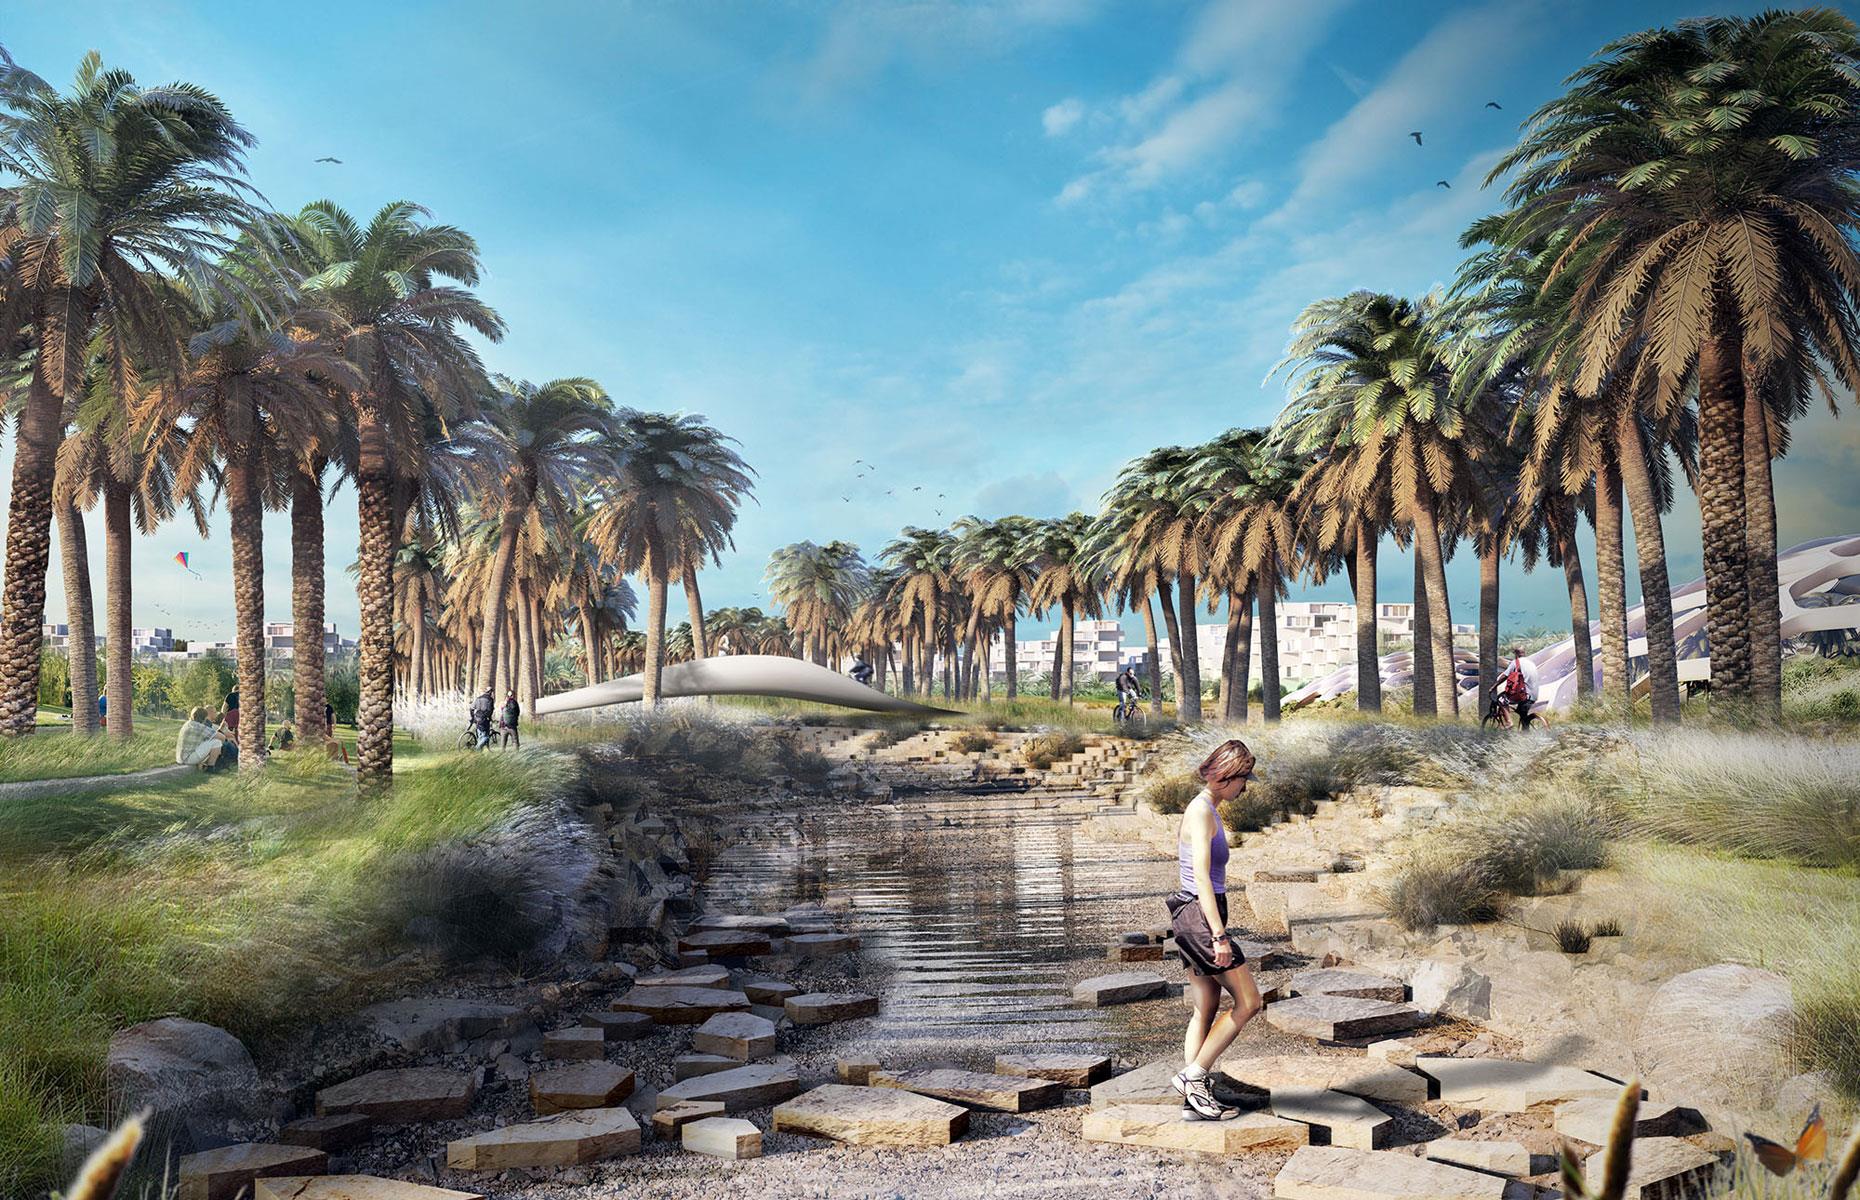 <p>Like XZero City, the megaproject will have a wadi oasis at its heart and feature several hubs. It too will include a green-tech hub, a medical and wellness hub, an education hub, a five-star eco-resort and so on, but obviously on a smaller scale to fit its acreage. Water management will be just as scrupulous, while the city will also be zero-waste.</p>